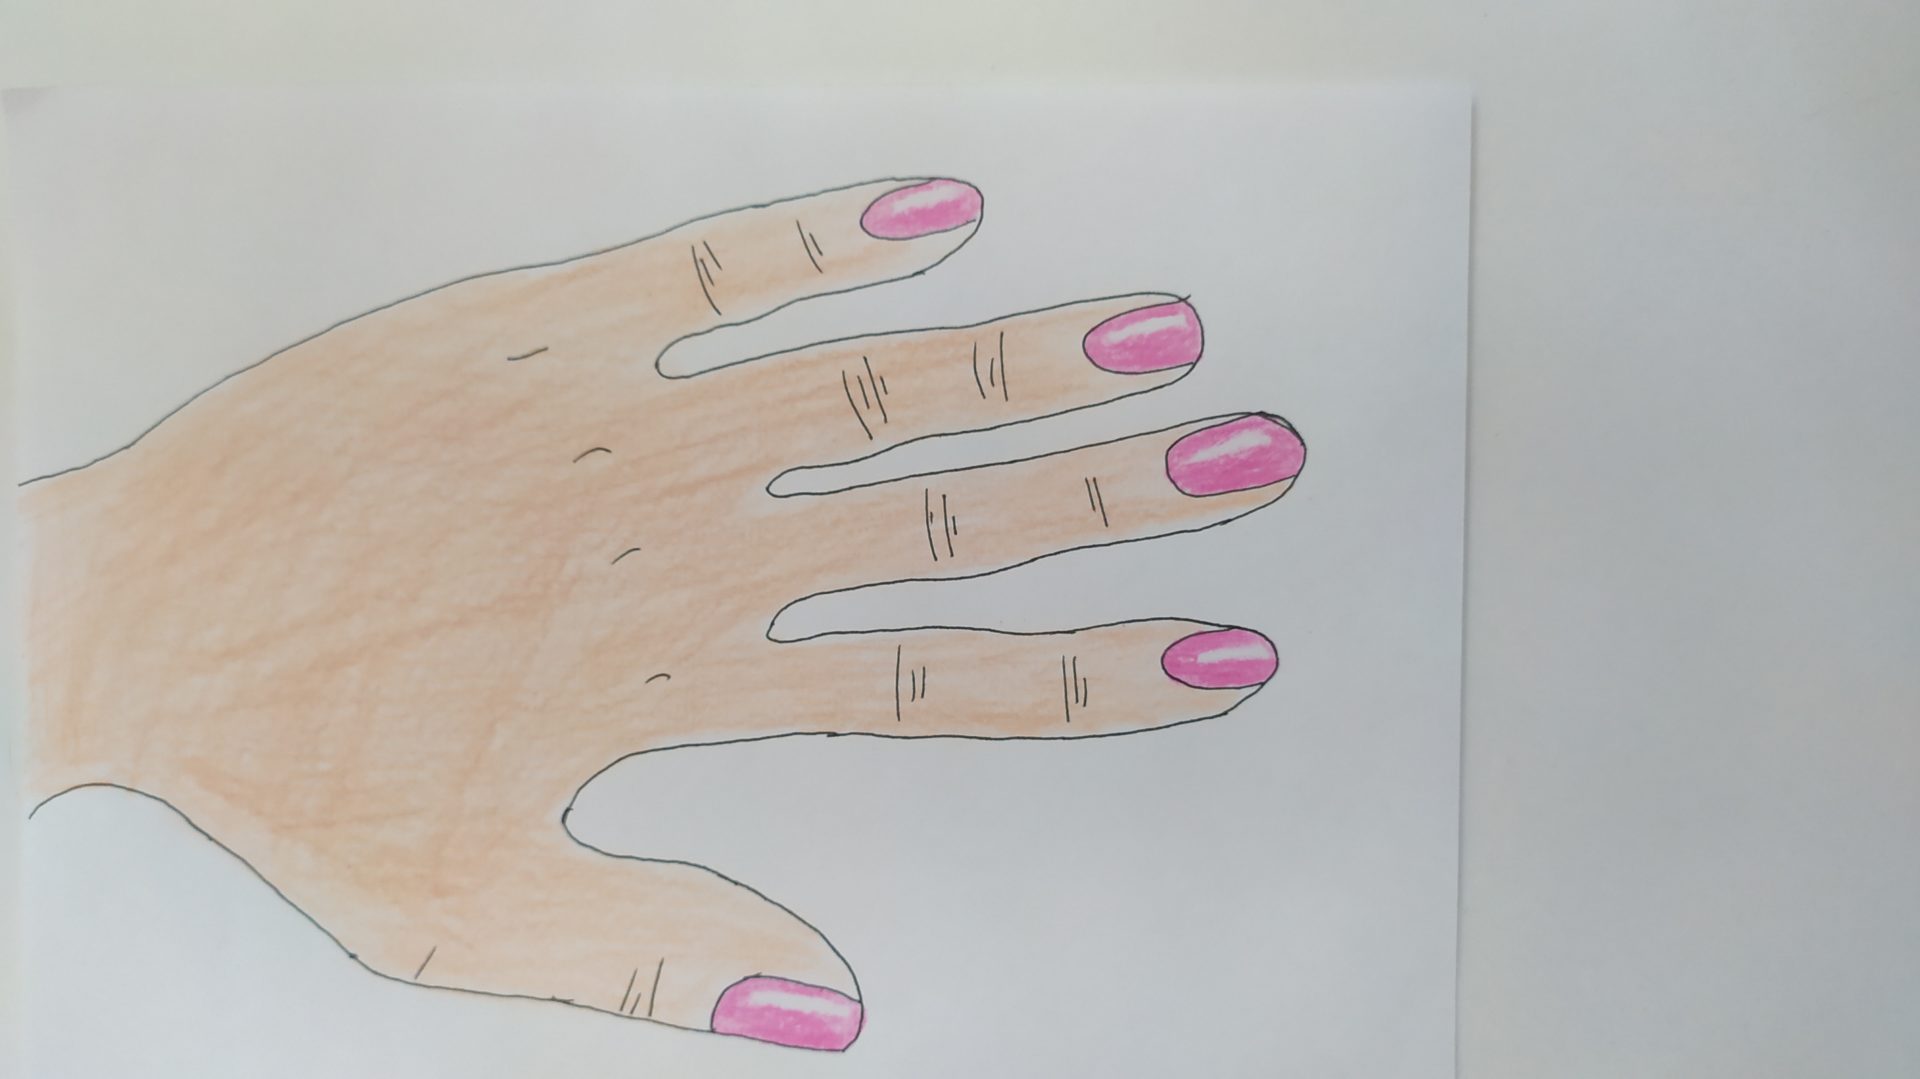 2 closed hands drawing